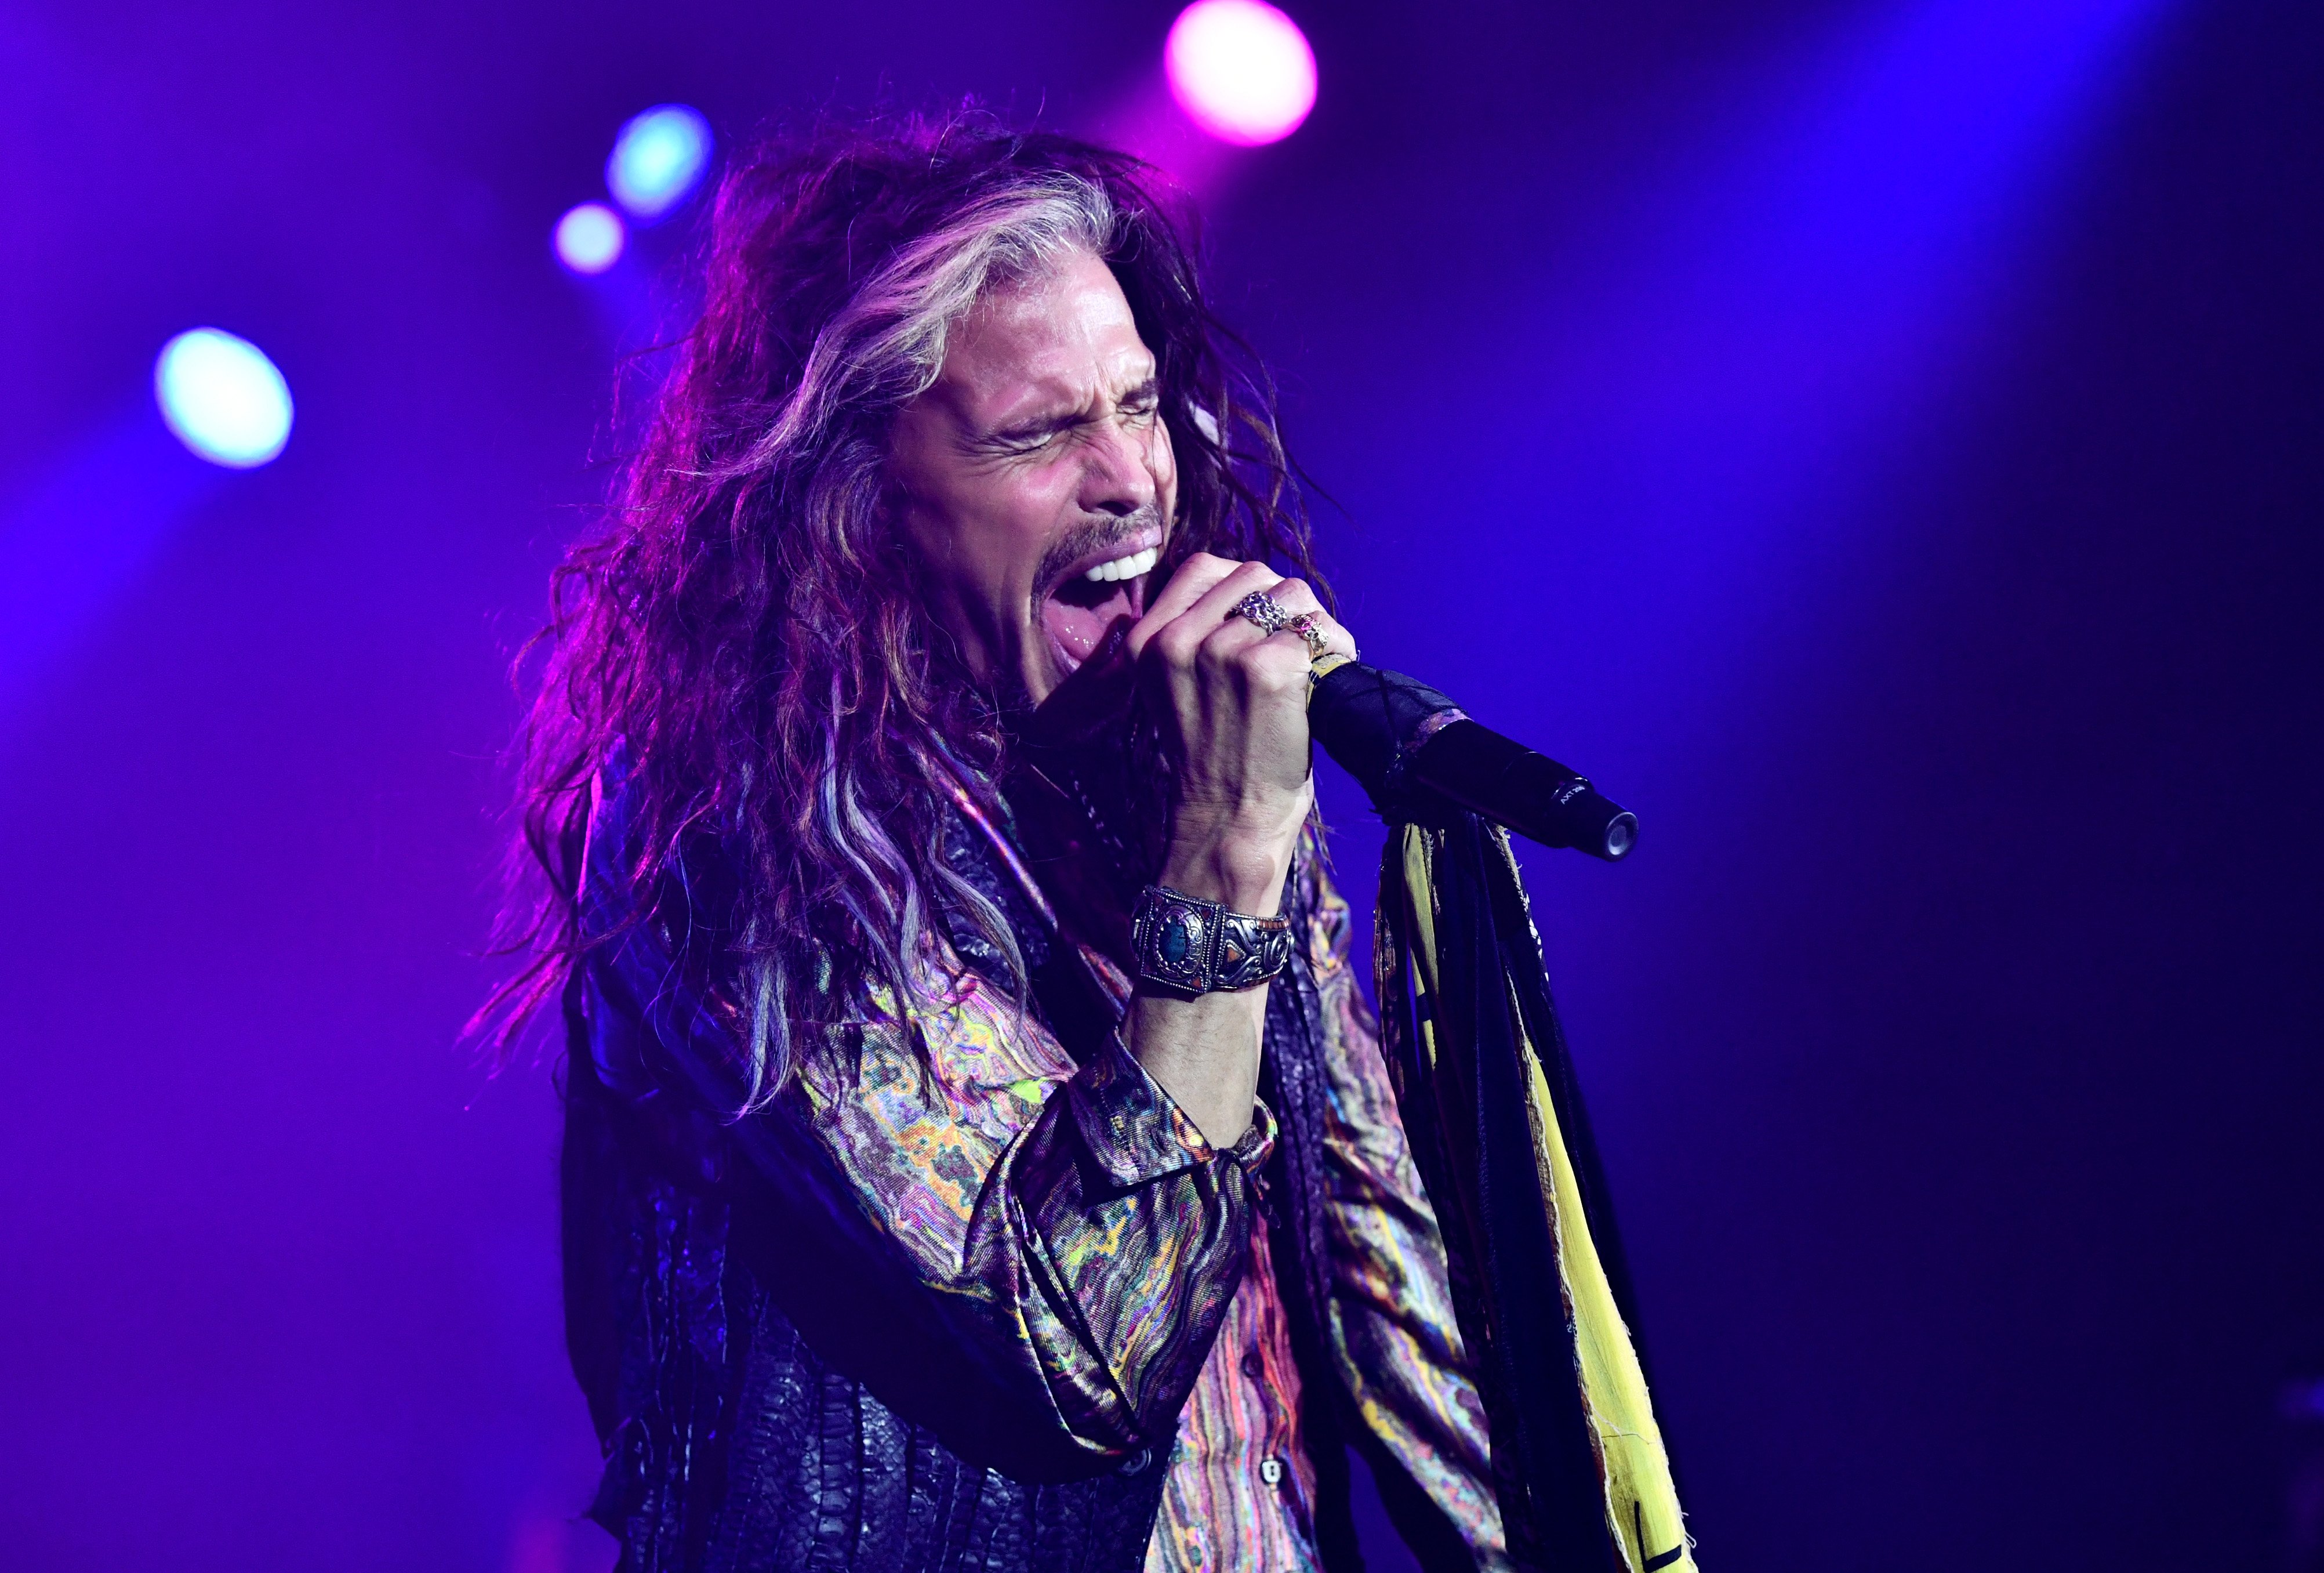 Steven Tyler sings into a microphone during a concert.